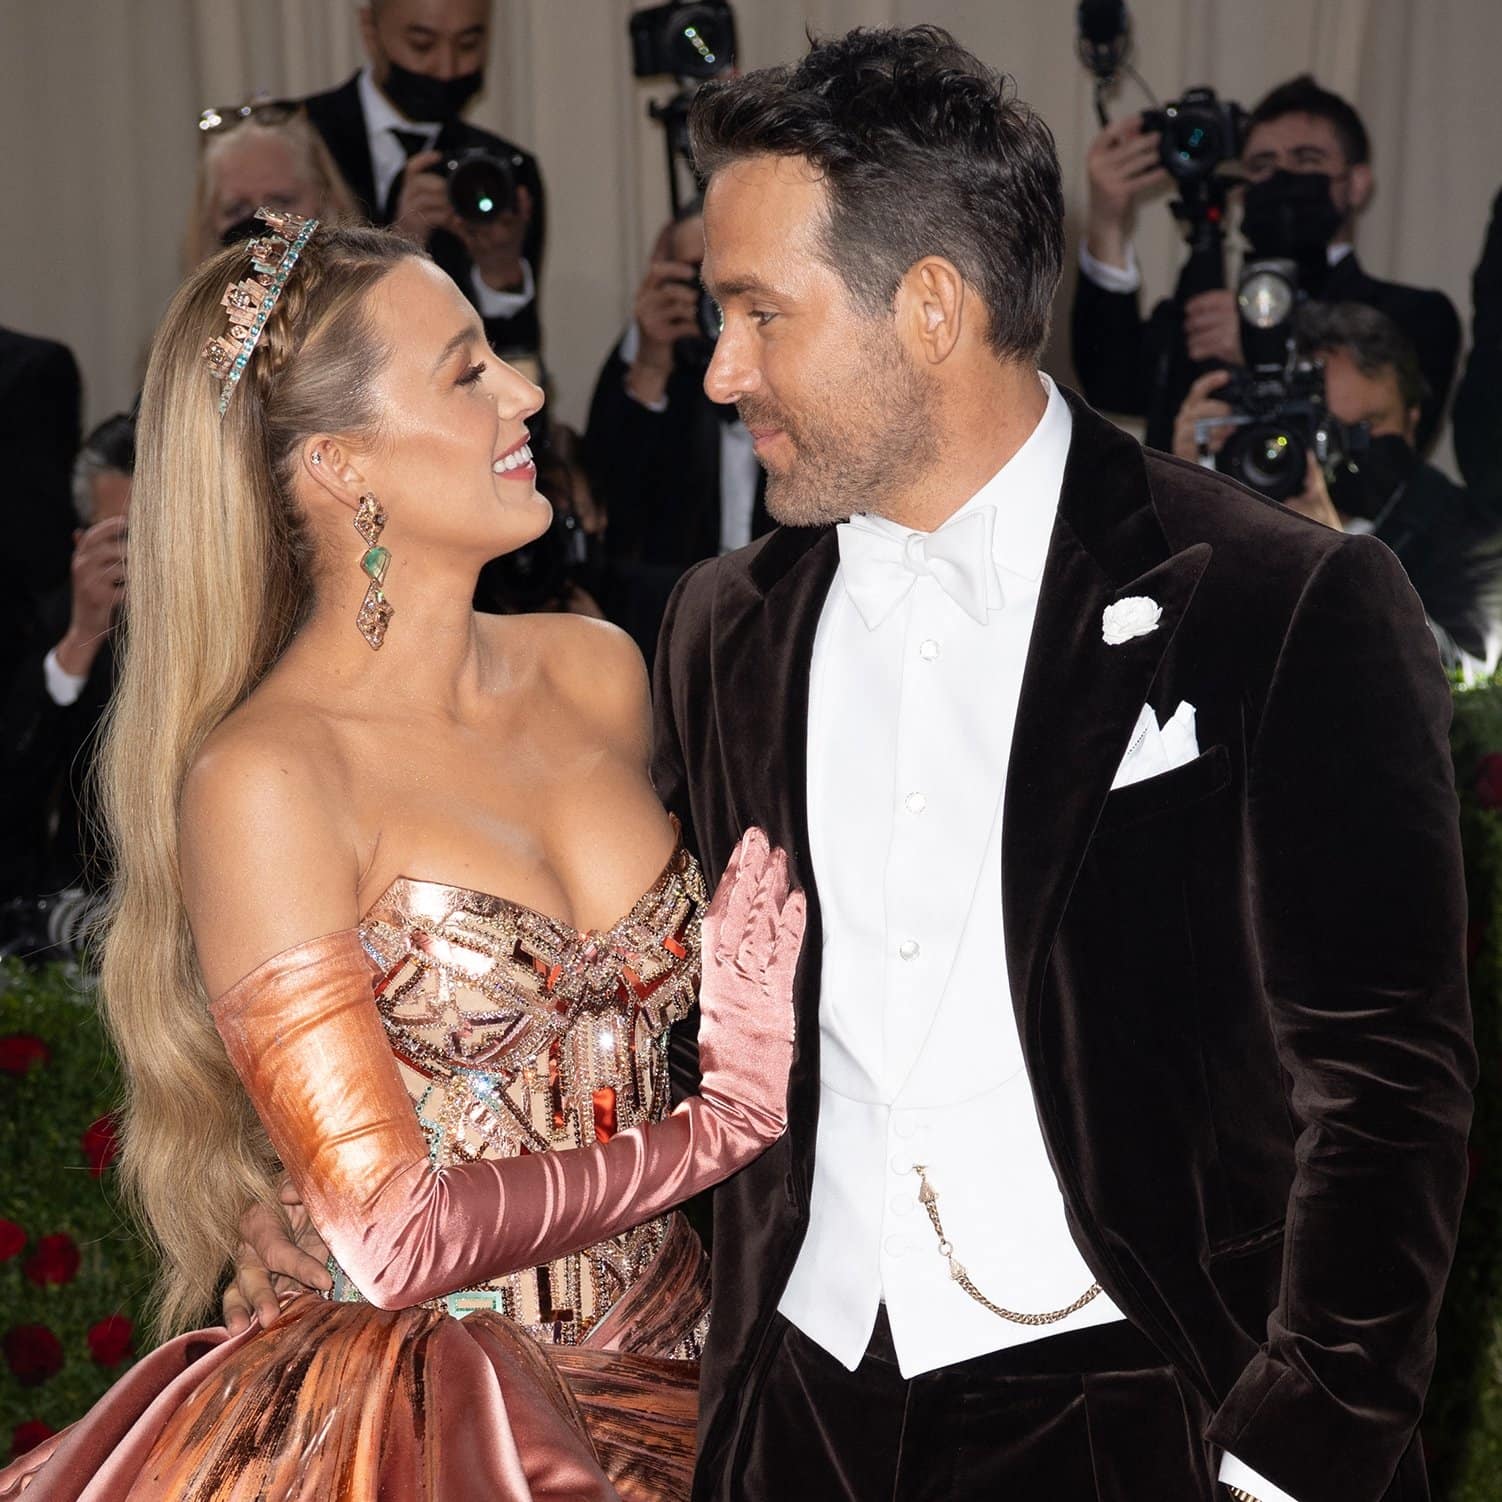 Blake Lively and Ryan Reynolds are parents of three daughters, James, Ines and Betty